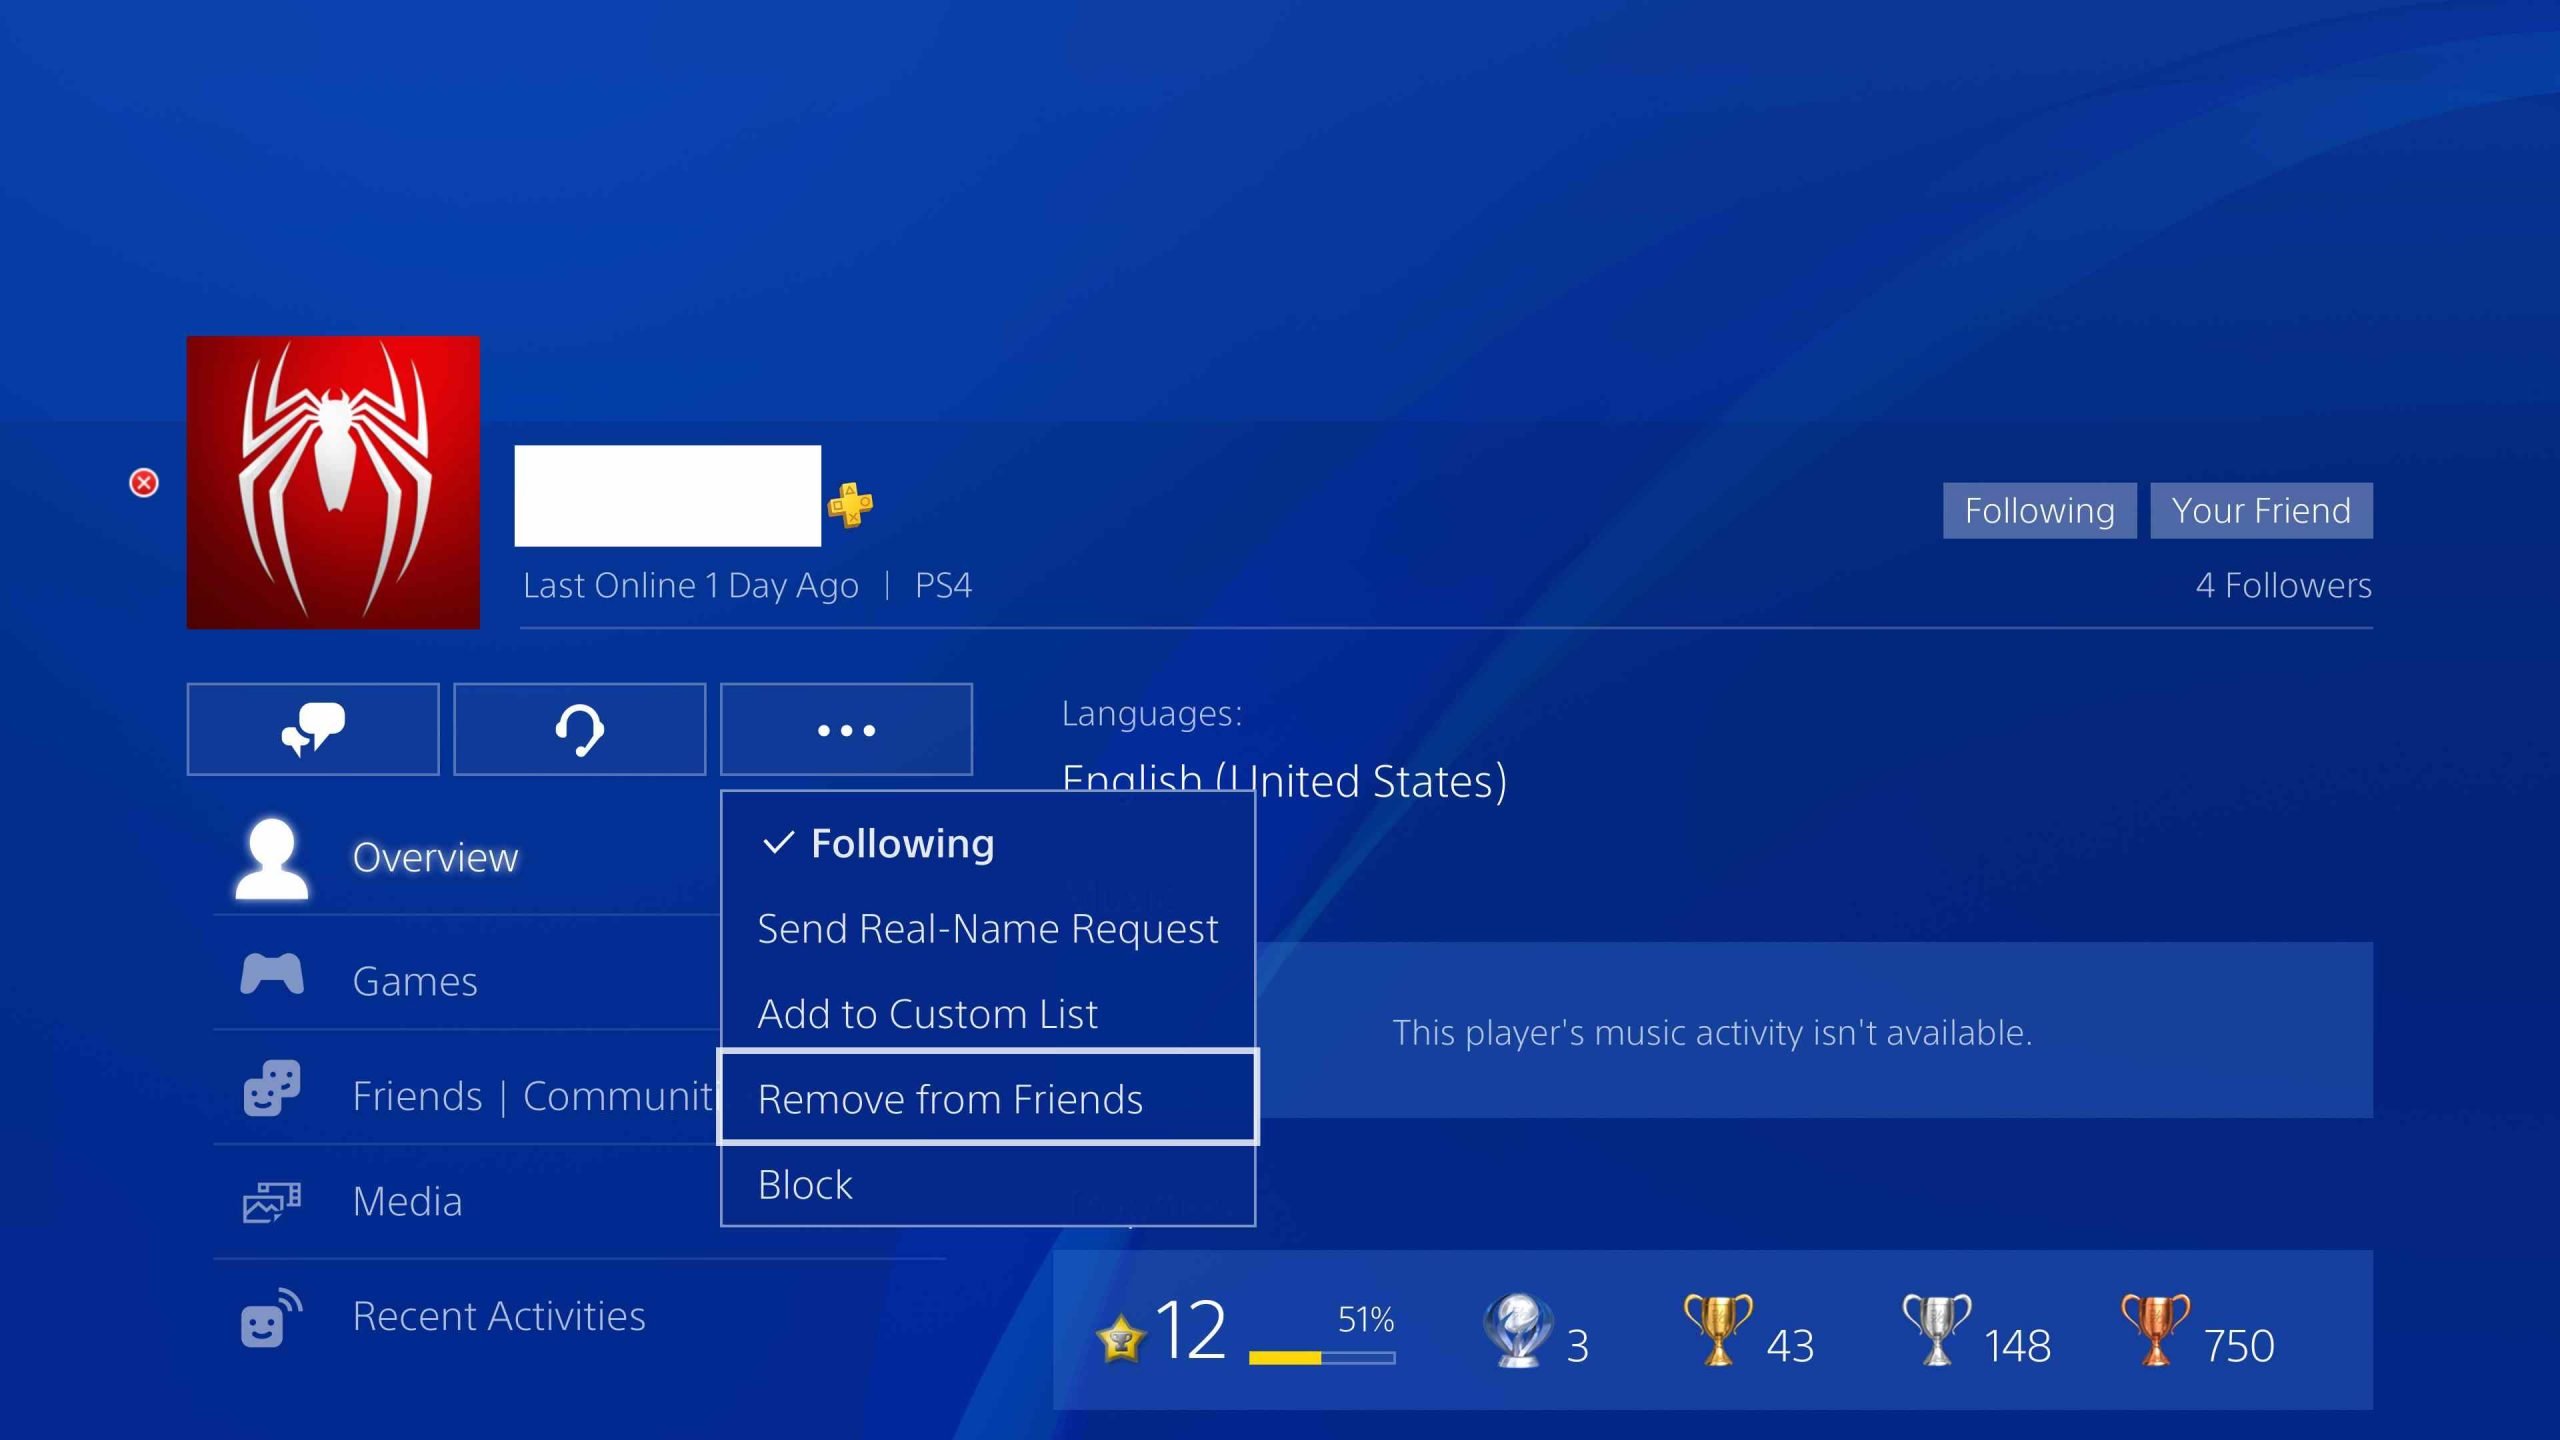 How To Delete Friends On Ps4 Quickly